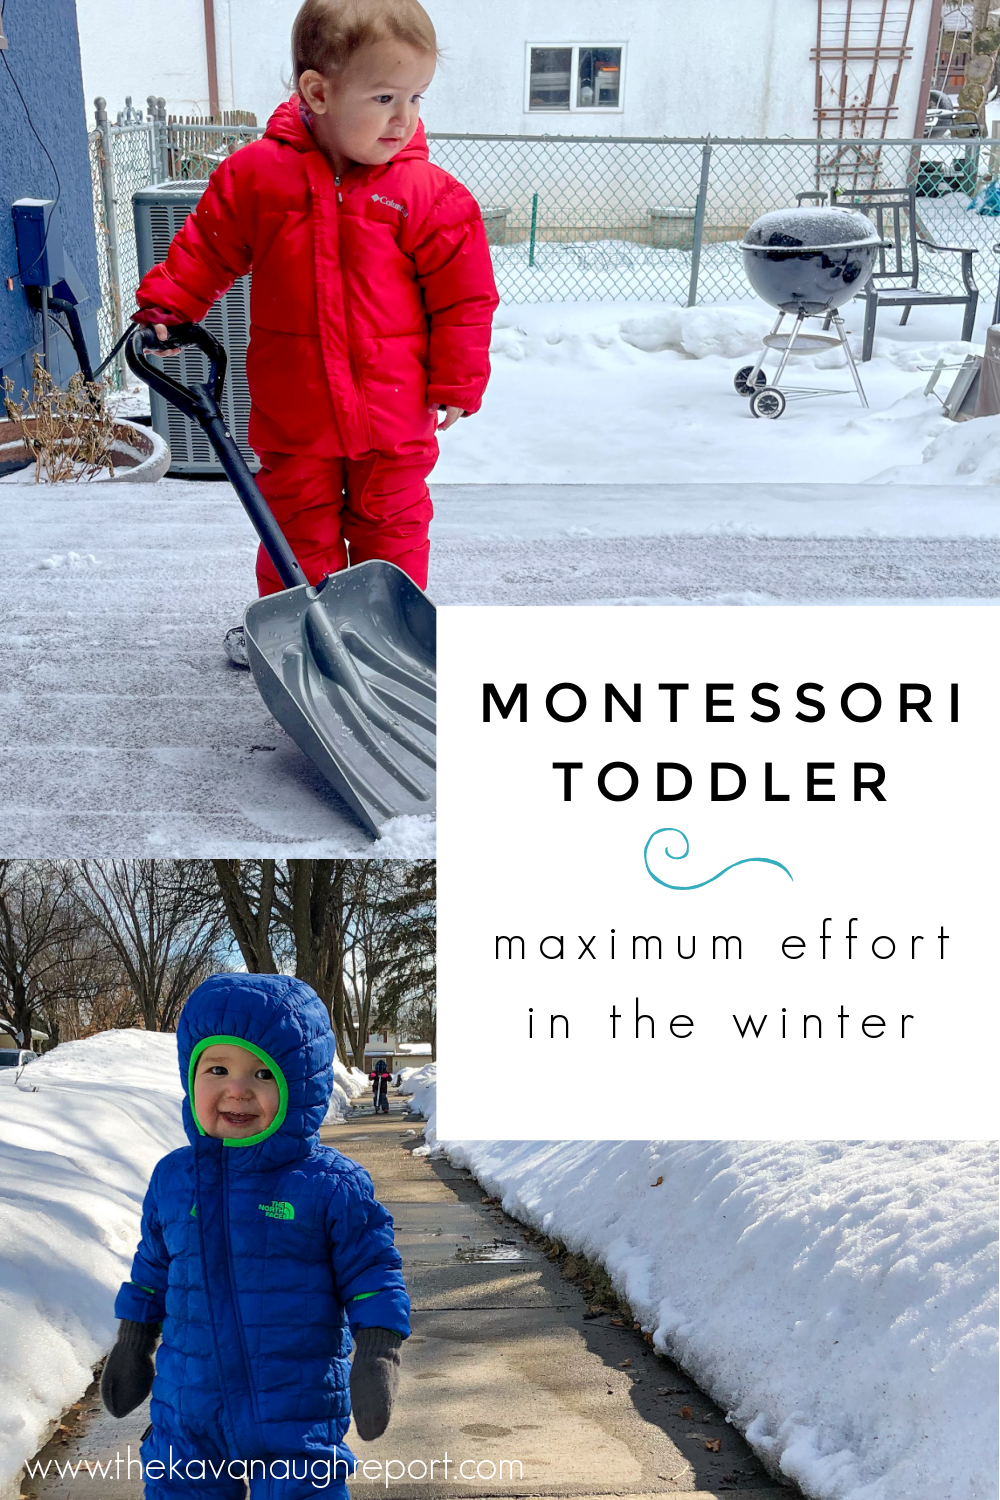 Montessori toddlers need active, heavy, and big work in order to reach maximum effort. Here are some ideas to reach maximum effort in the winter.